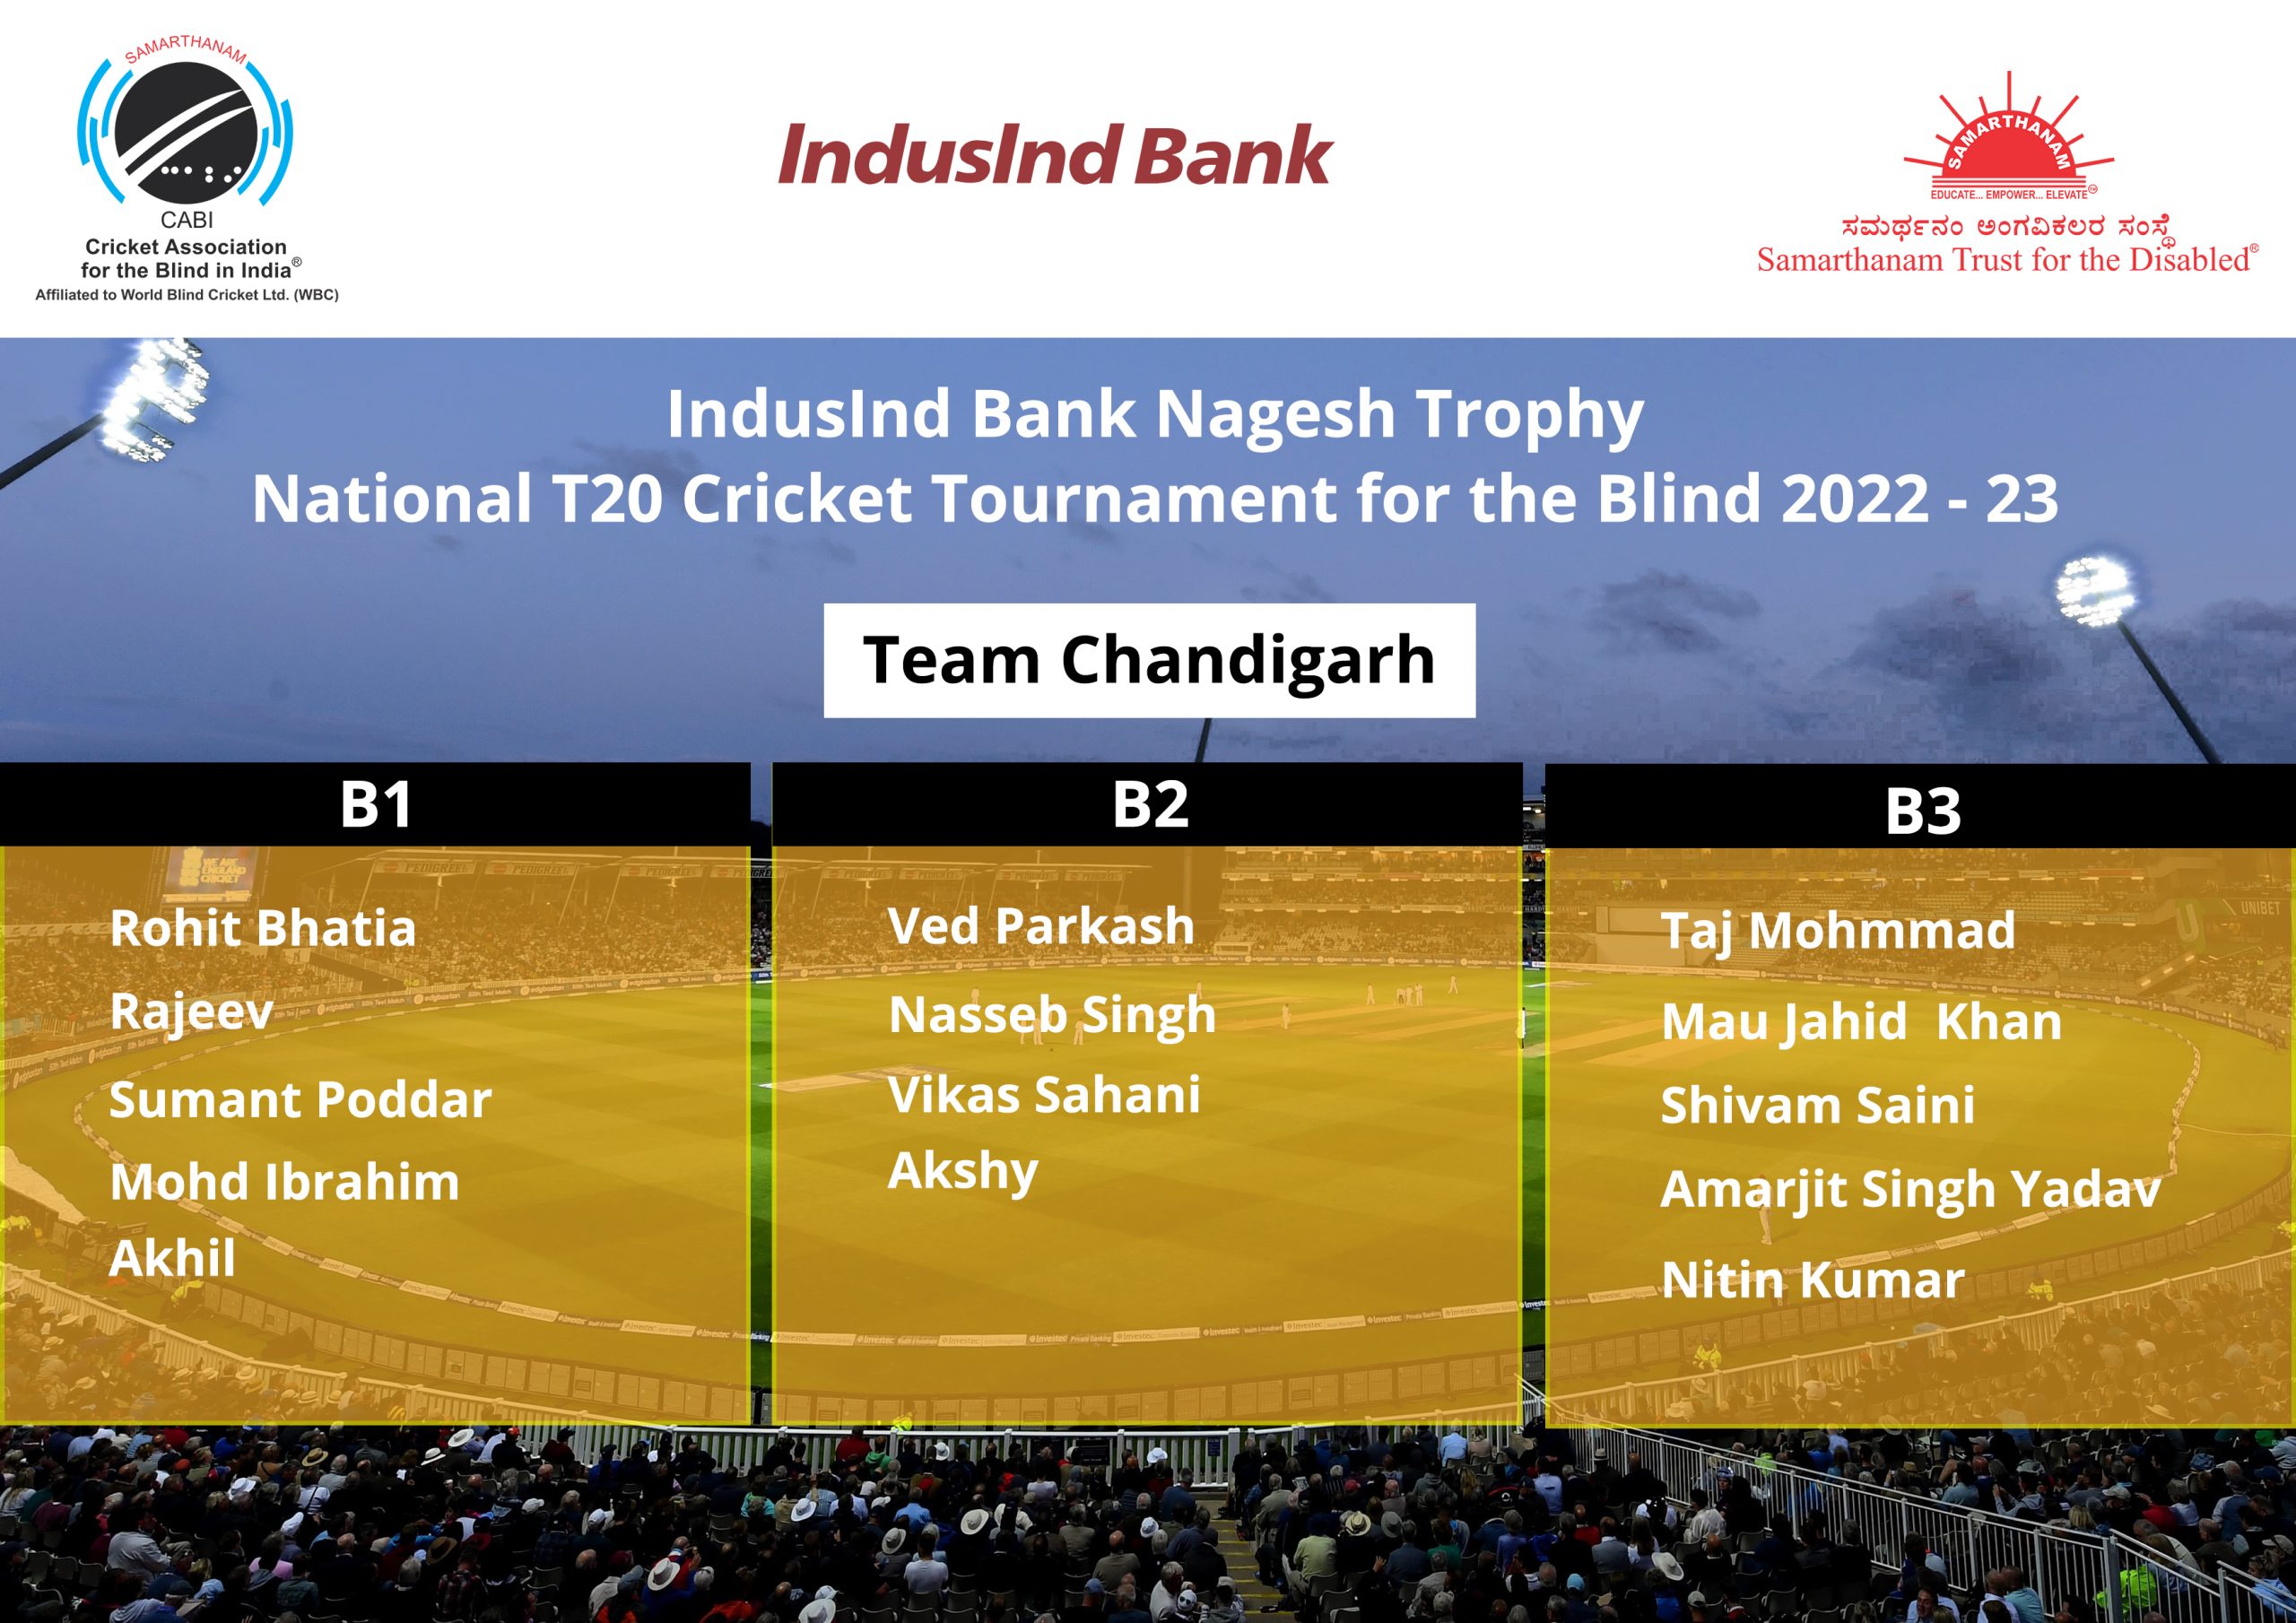 Team Chandigarh of IndusInd Bank Nagesh Trophy National T20 Cricket Tournament For The Blind 2022-23